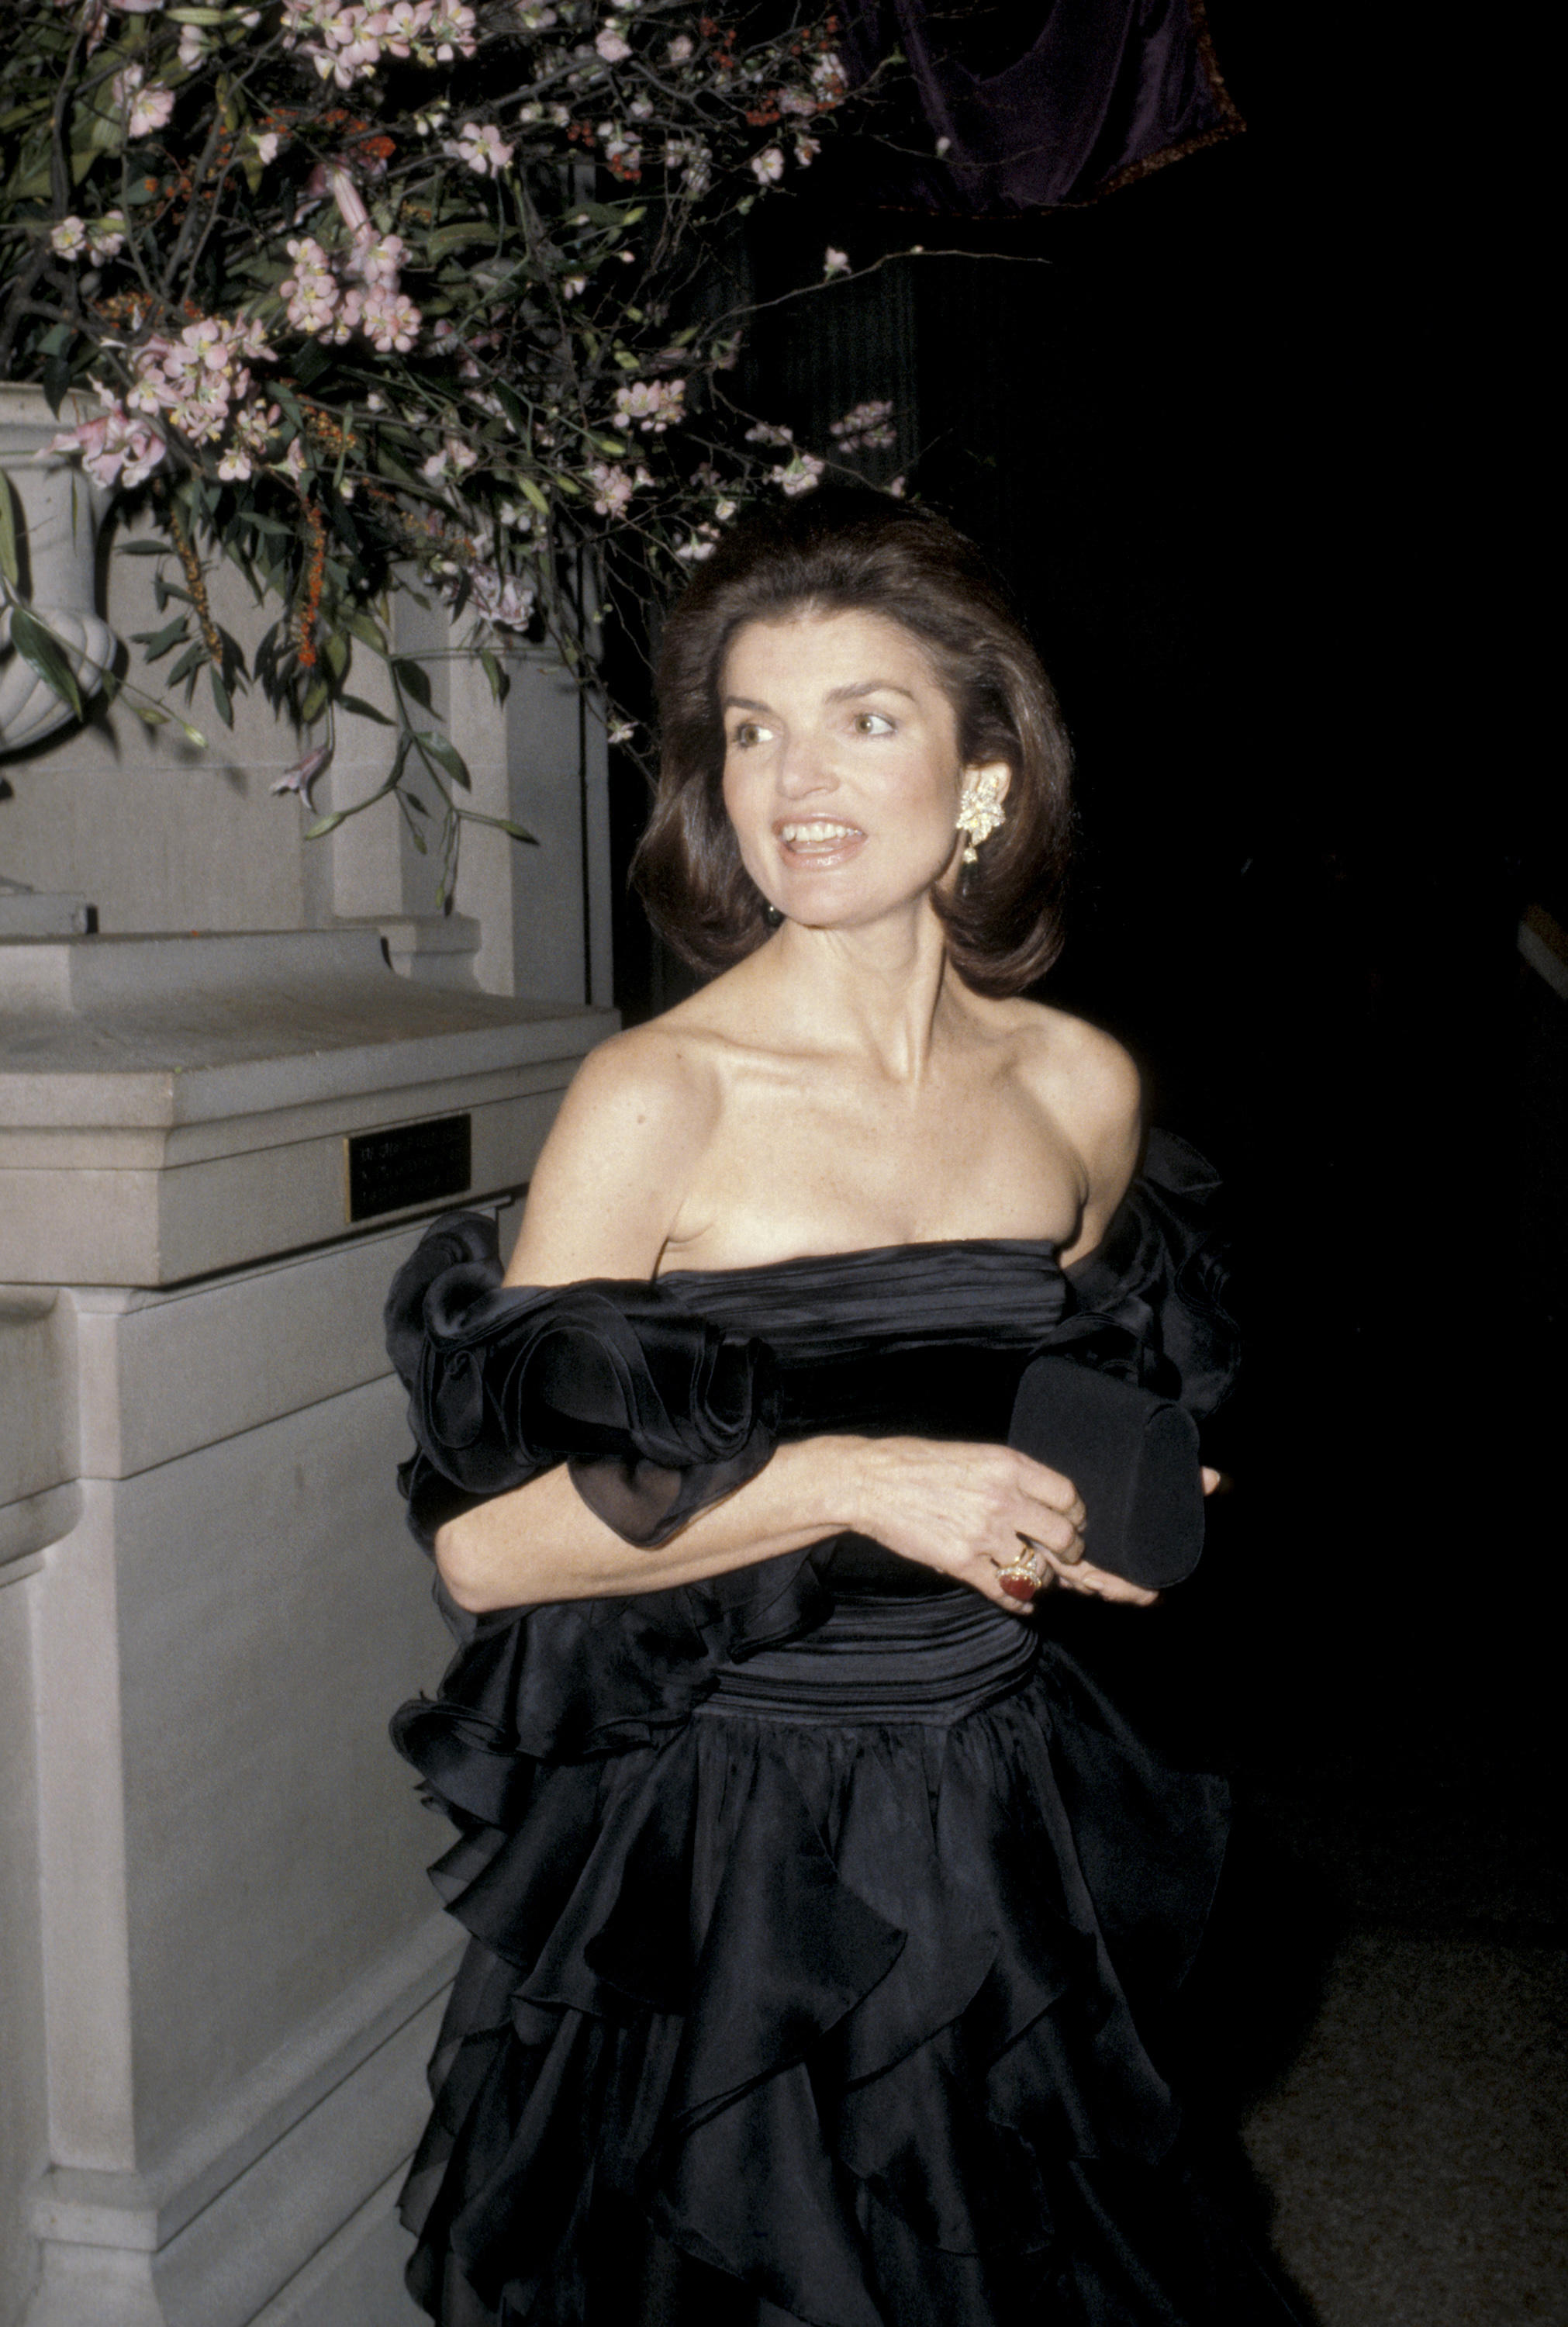 29 iconic met gala looks from the best-dressed guests since 1973